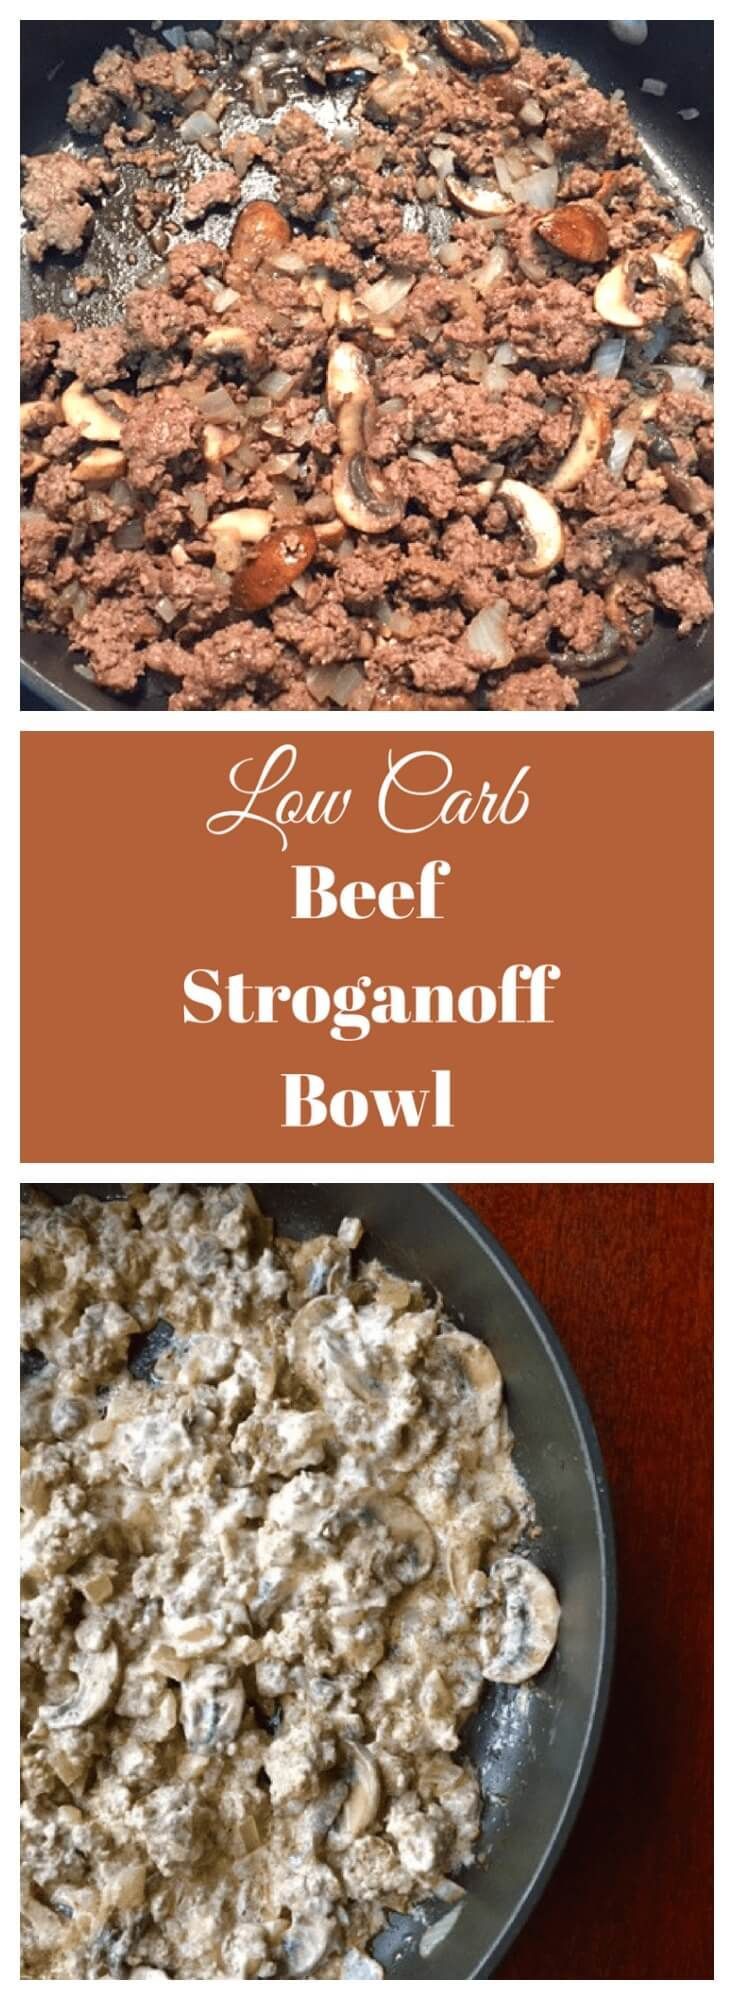 Low Carb Beef Stroganoff Bowl -   25 low carb beef recipes
 ideas